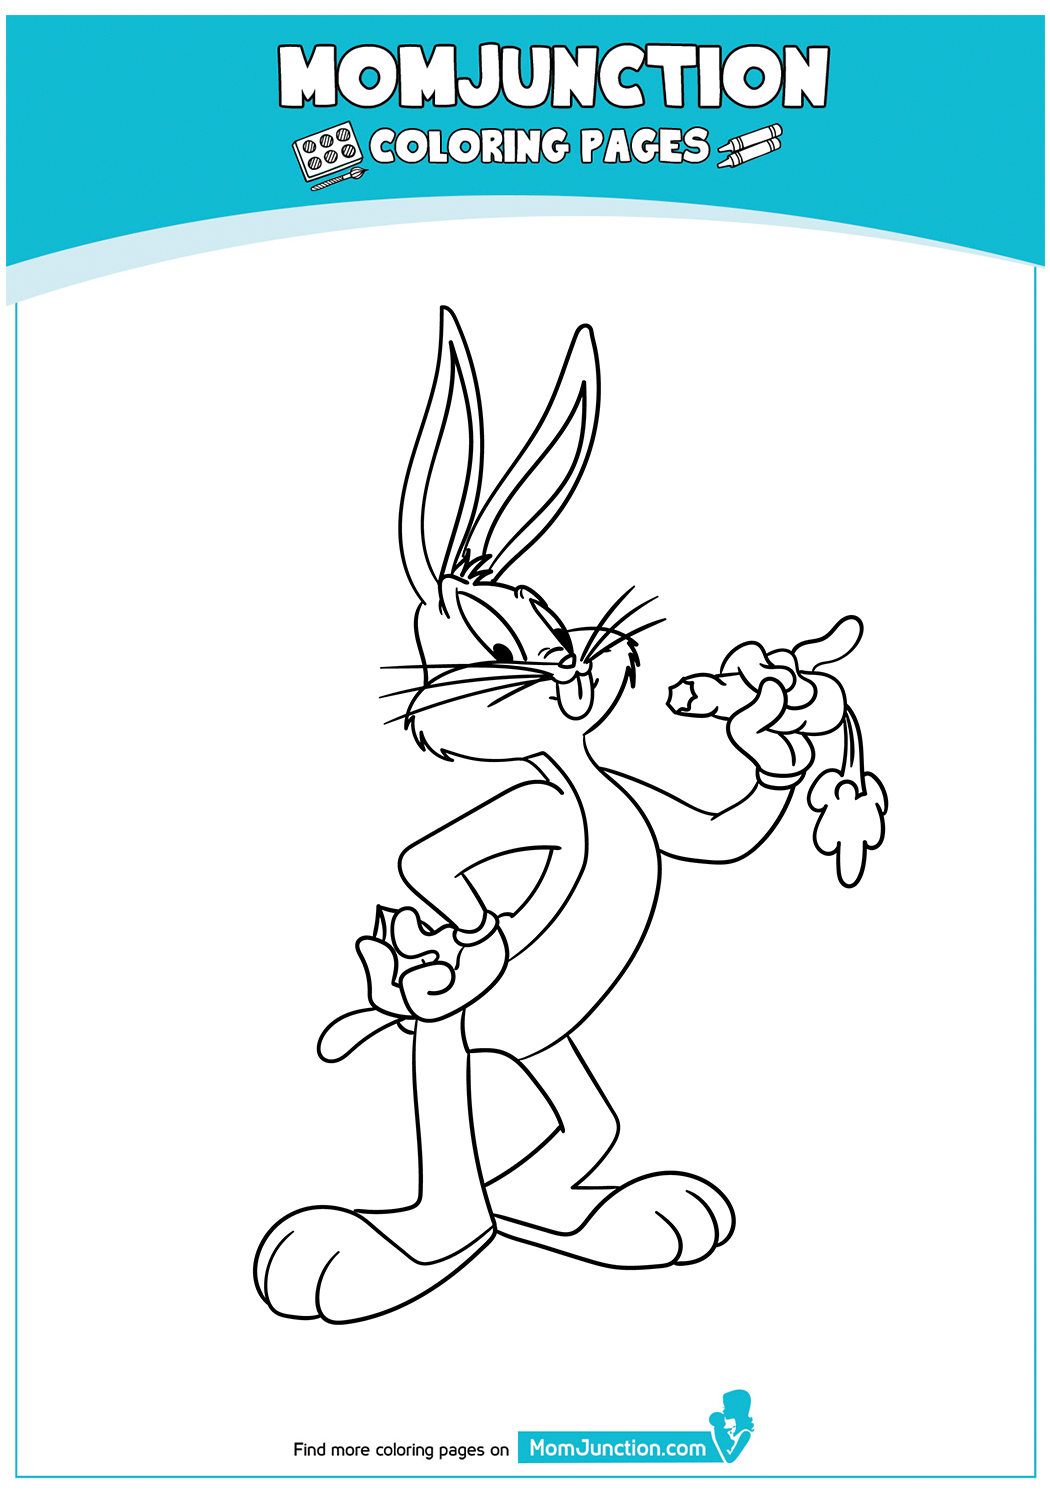 bugs-bunny-coloring-8-17